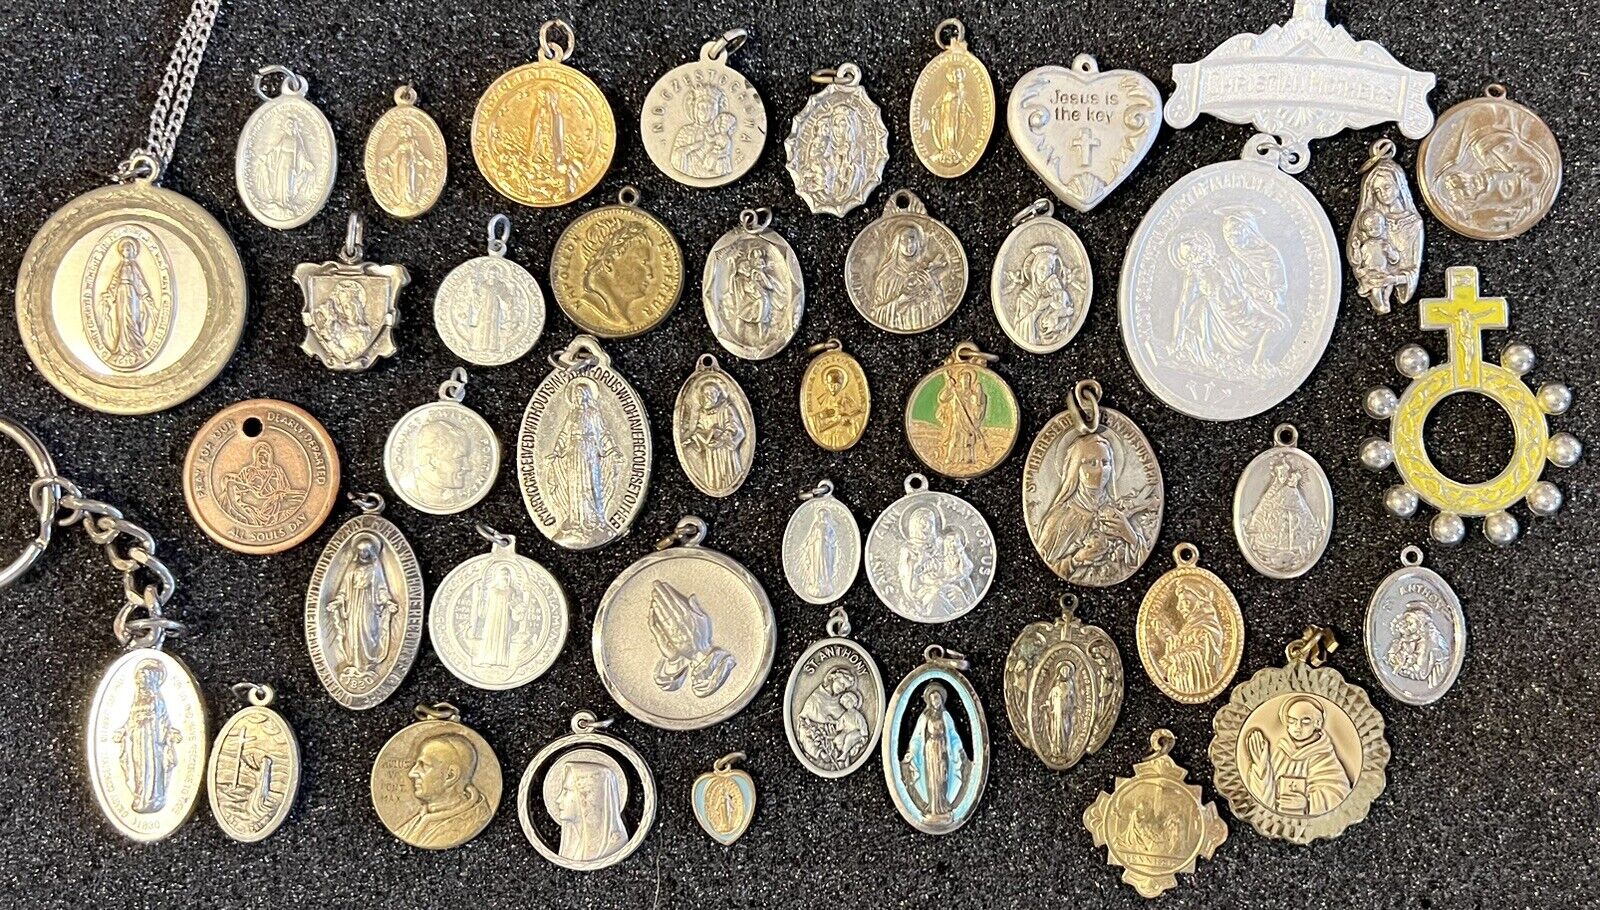 LOT OF 43 Mixed Vintage Christian Catholic Religious Medals Medallions Pendants